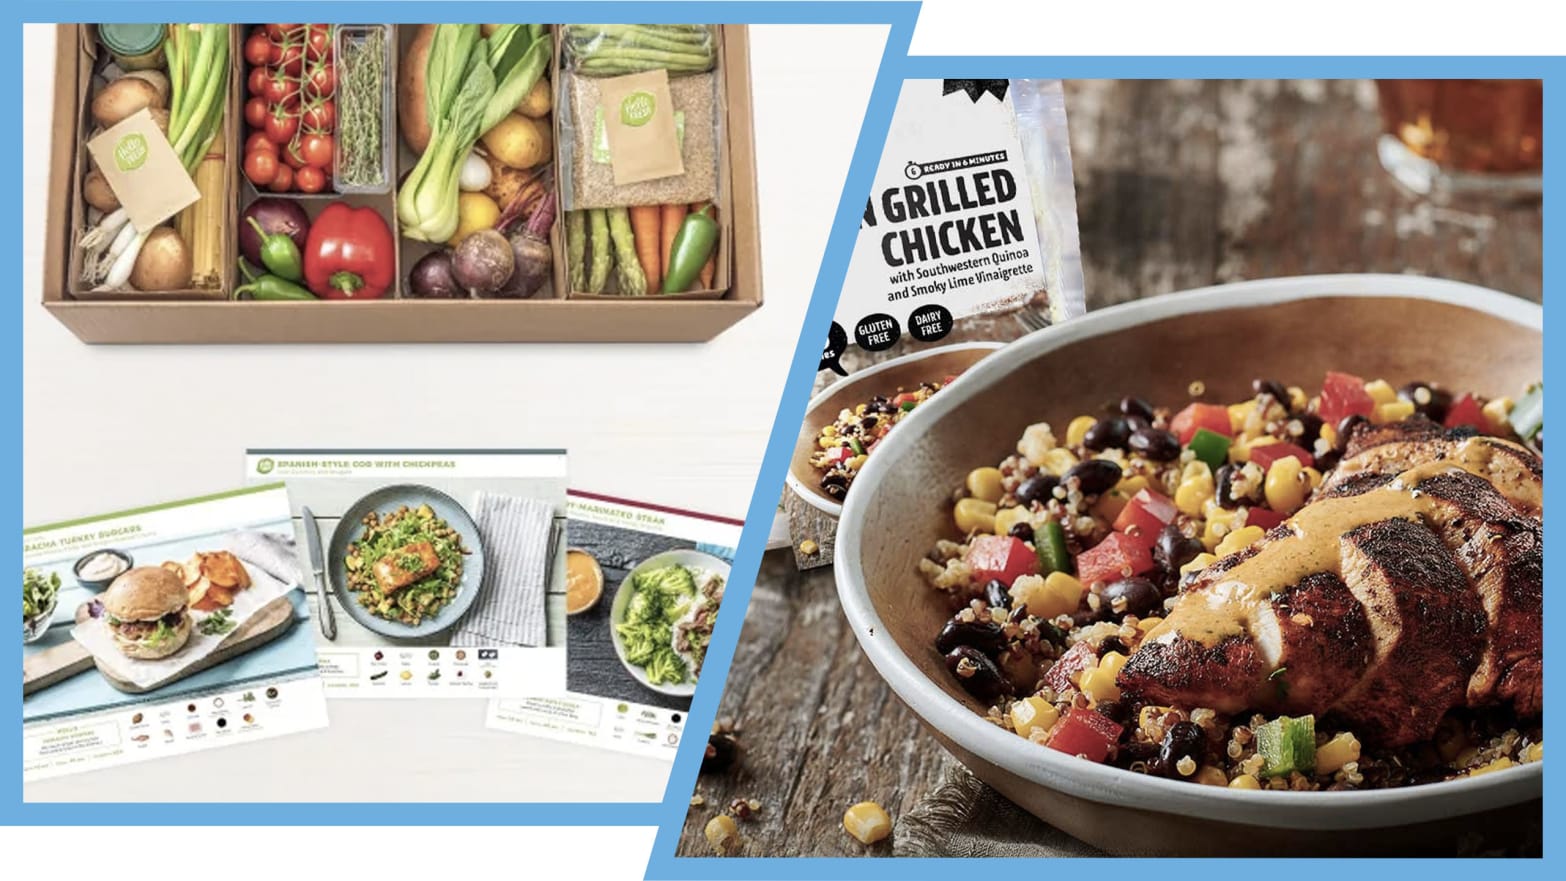 Meal Kits Like Blue Apron Get My Picky Kids to Eat Real Food